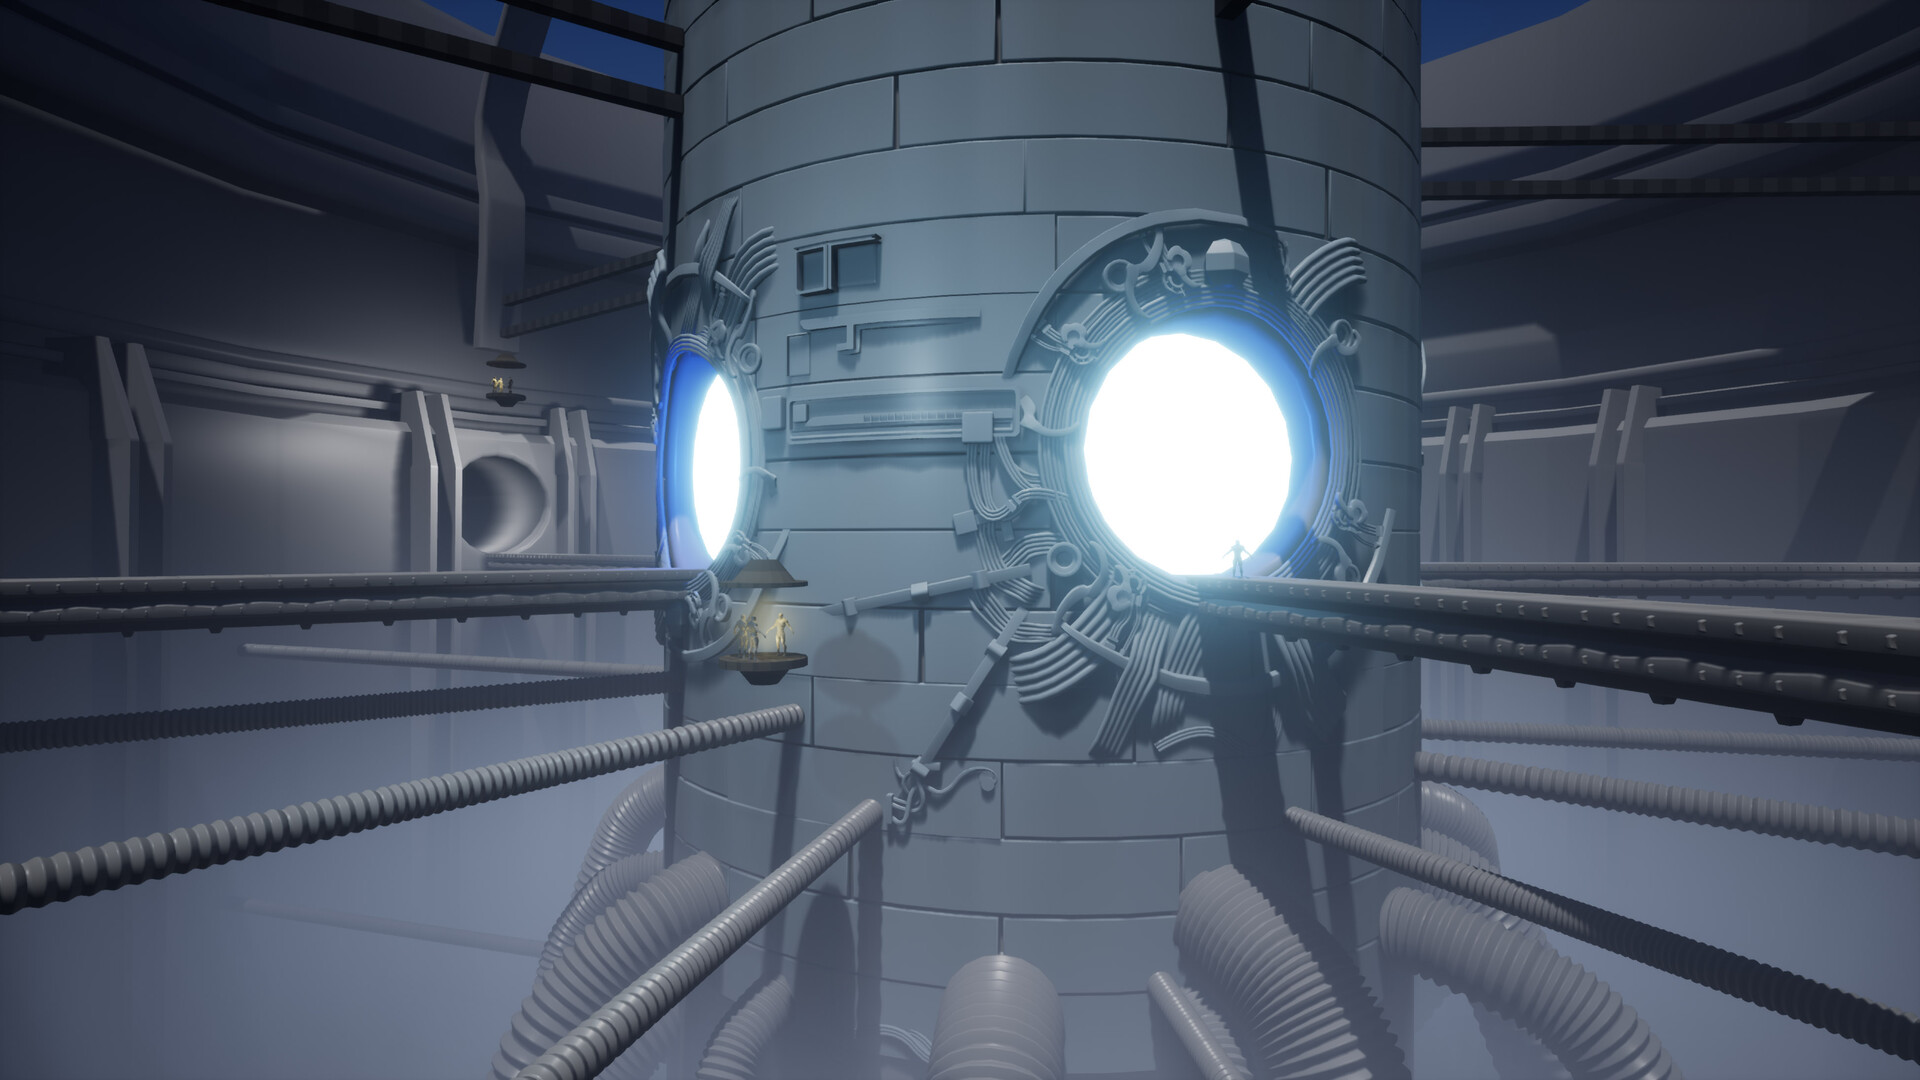 Main camera screenshot, showcasing the cylindrical structure. Compared to the last blog update, this time around the portal openings have a frame around them consisting of wires and greeble details.